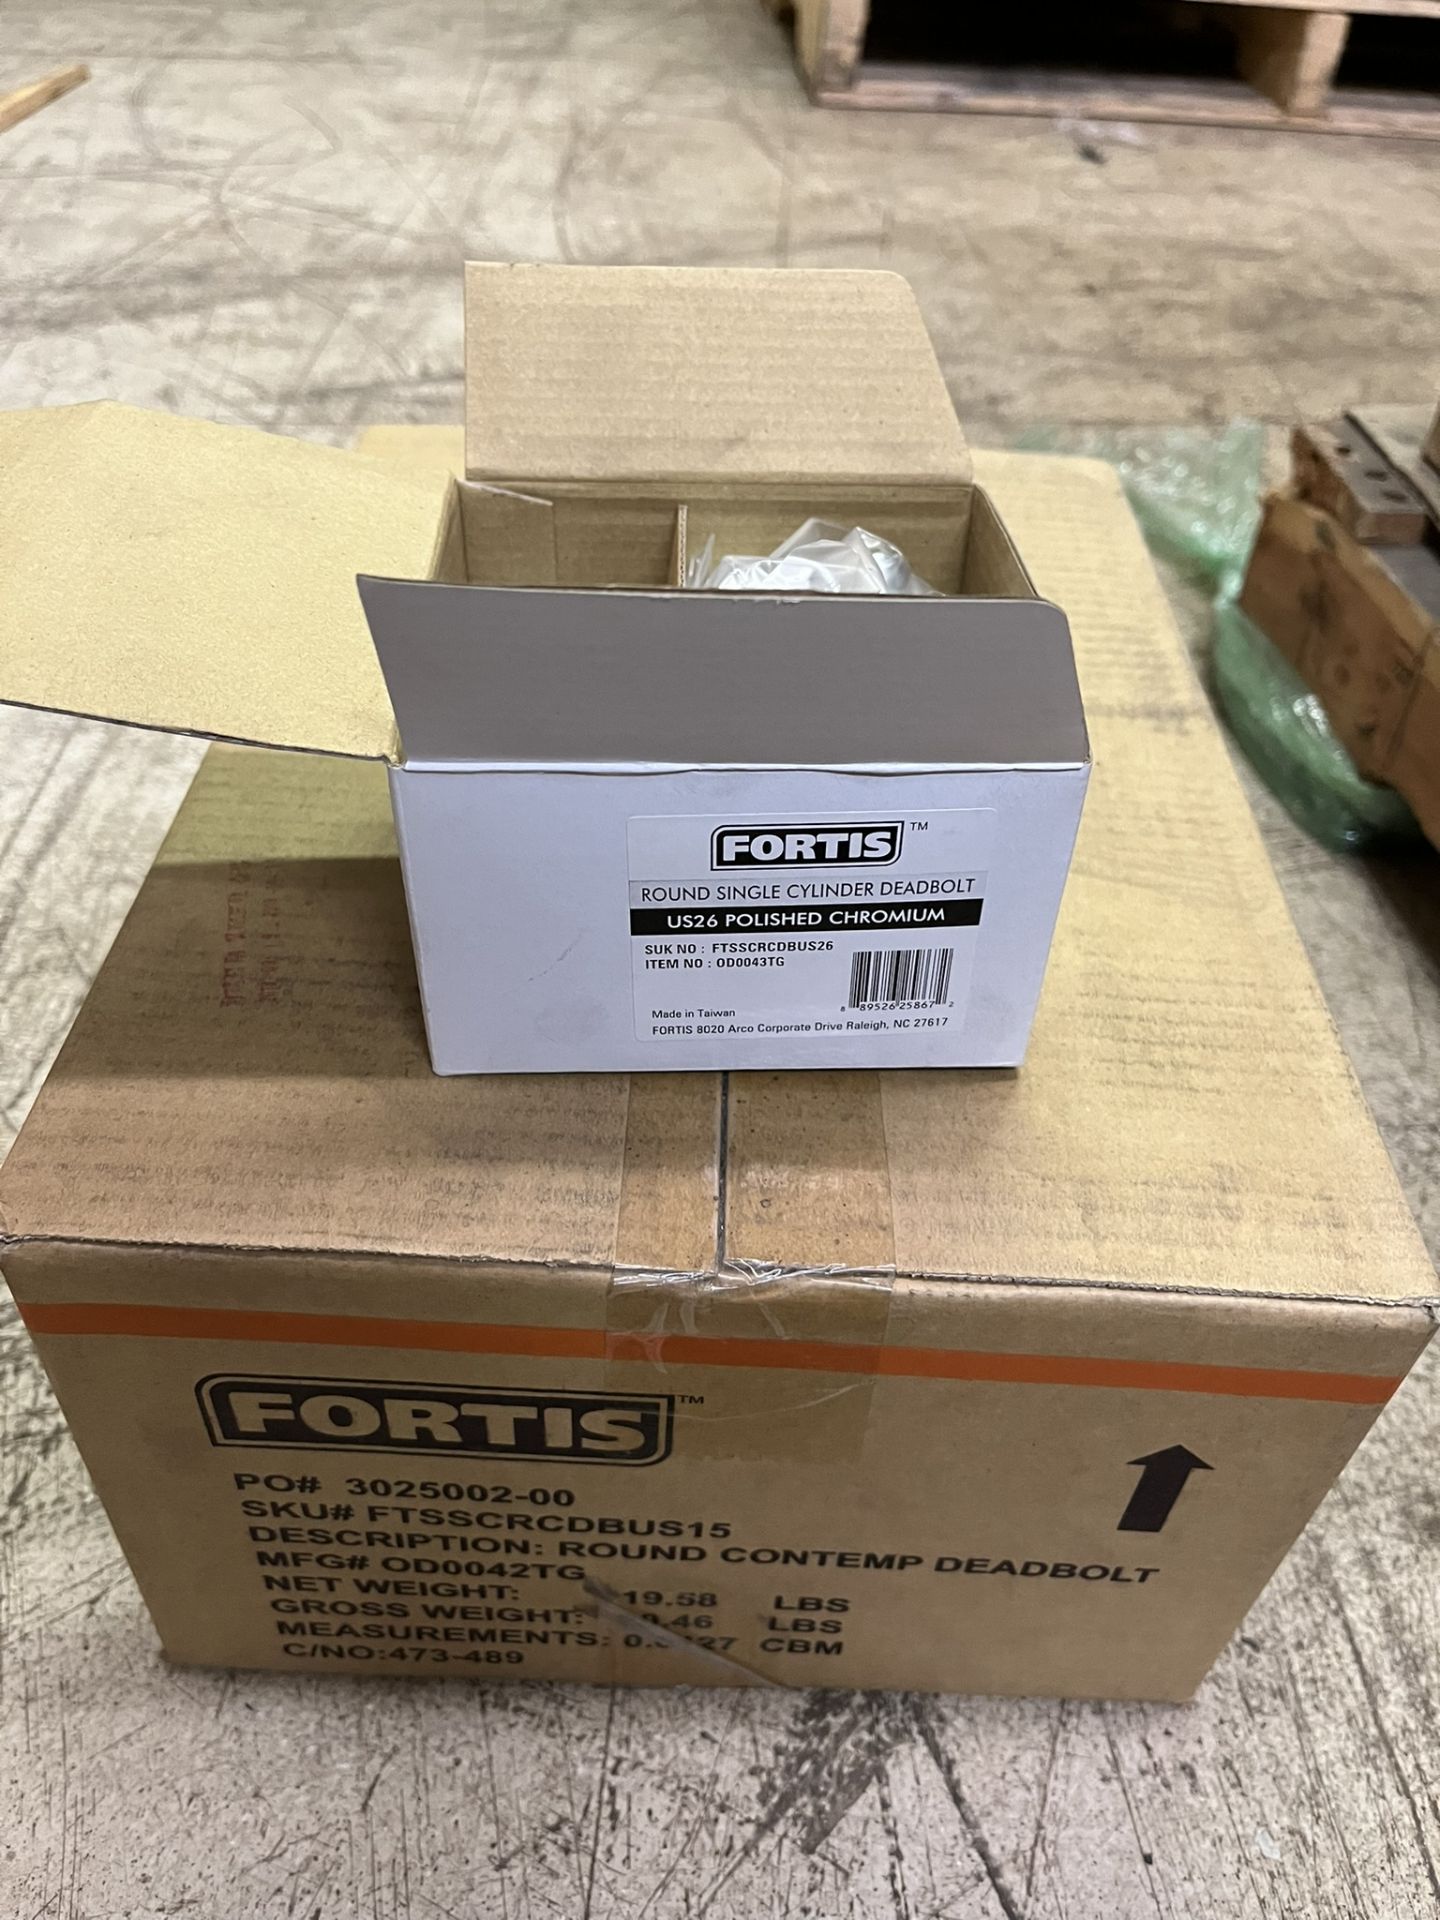 (12) FORTIS ROUND SINGLE CYLINDER DEADBOLTS US26 POLISHED CHROMIUM - Image 3 of 3